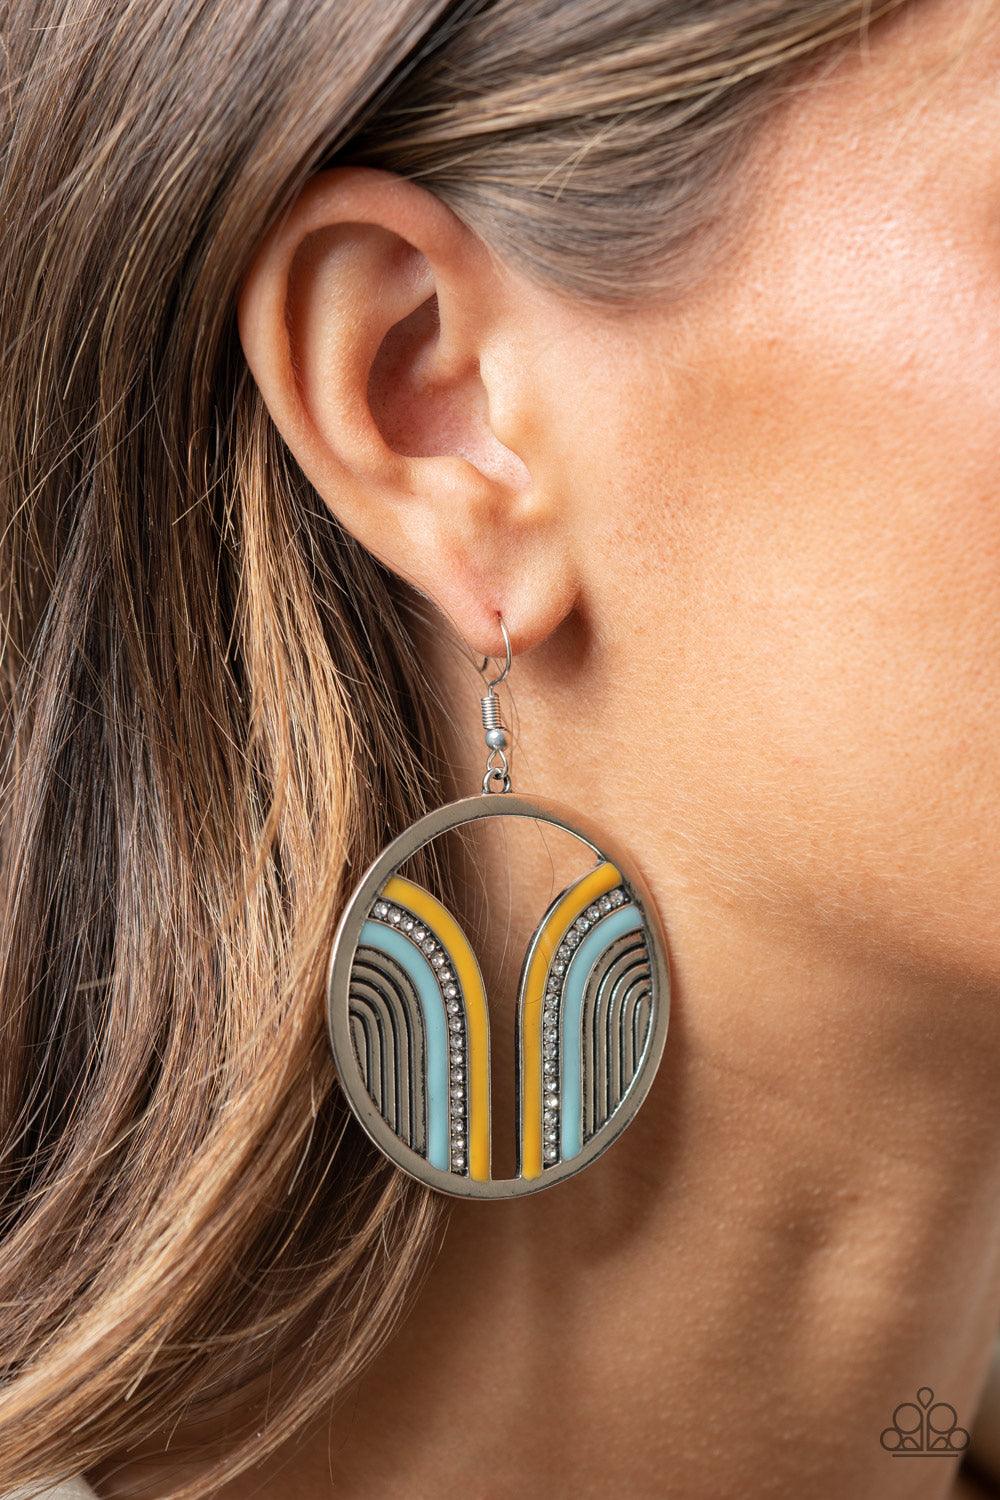 Paparazzi Accessories Delightfully Deco - Multi Infused with a glittery row of white rhinestones, shiny Cerulean and Illuminating arcs curve into juxtaposed frames inside a classic silver hoop, creating a colorful art deco inspired centerpiece. Earring at